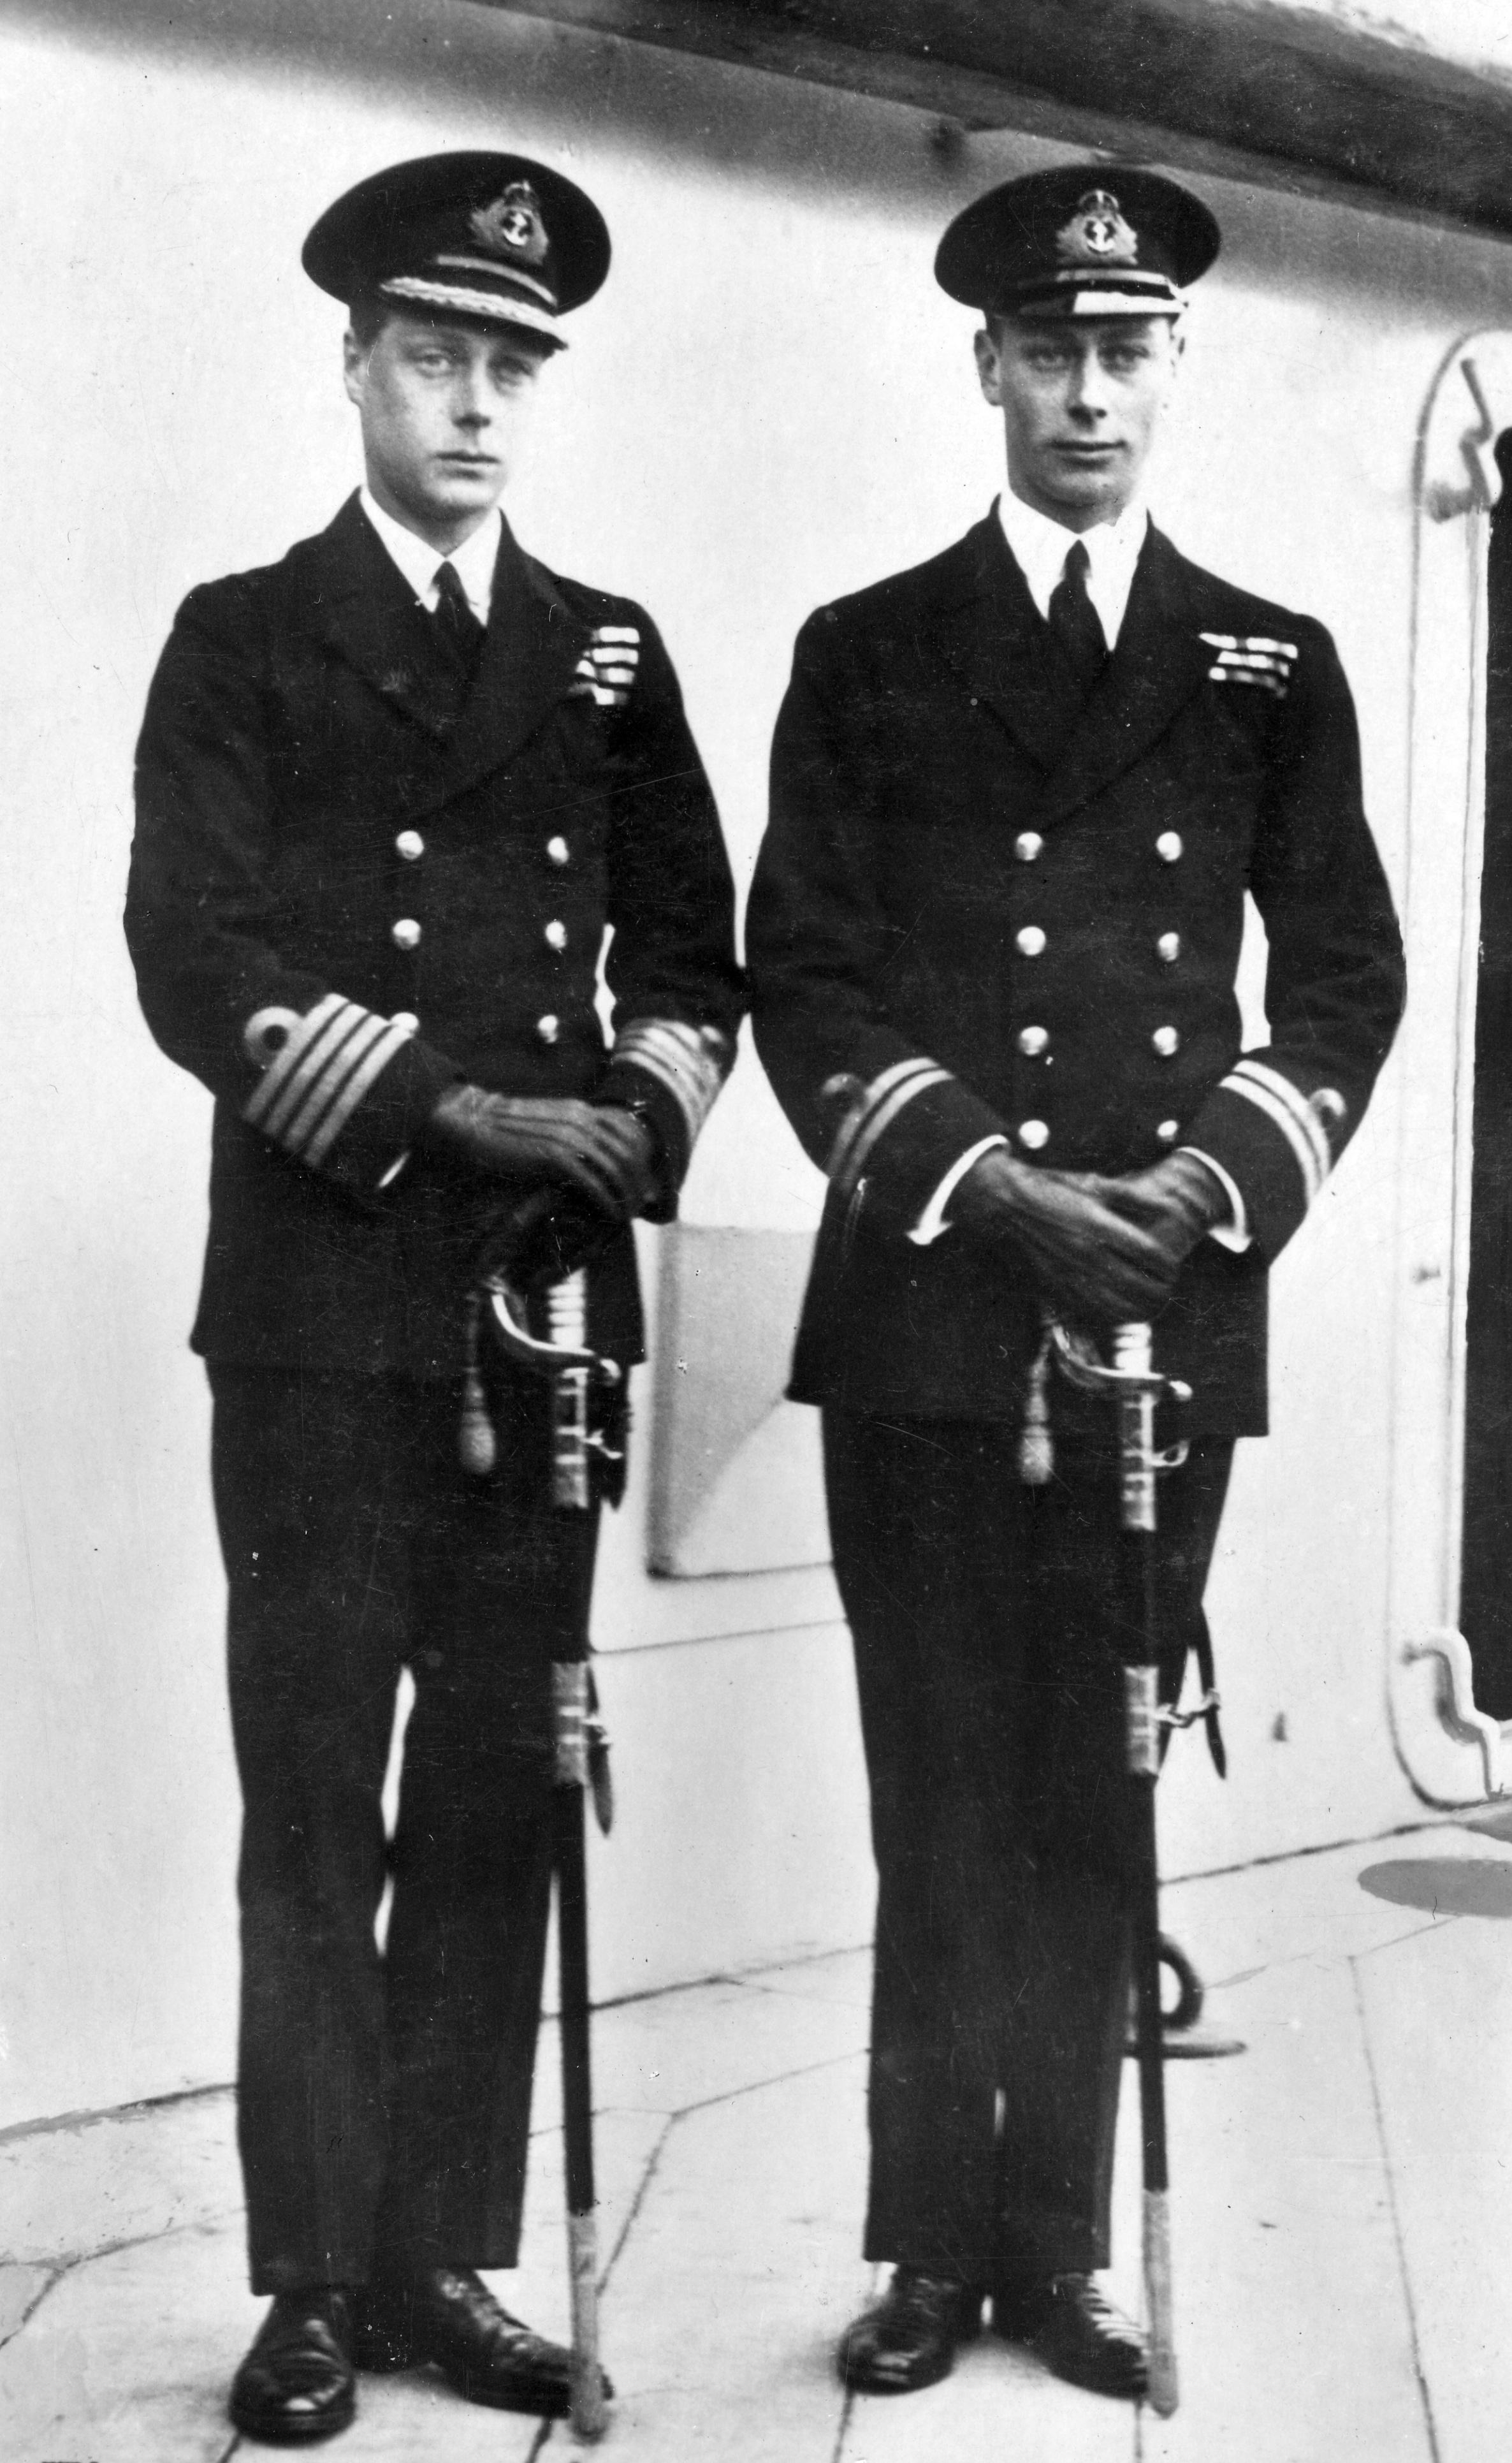 Edward, Prince of Wales (1894-1972), later King Edward VIII, Duke of Windsor with his younger brother, Albert, Duke of York (1895-1951), later King George VI